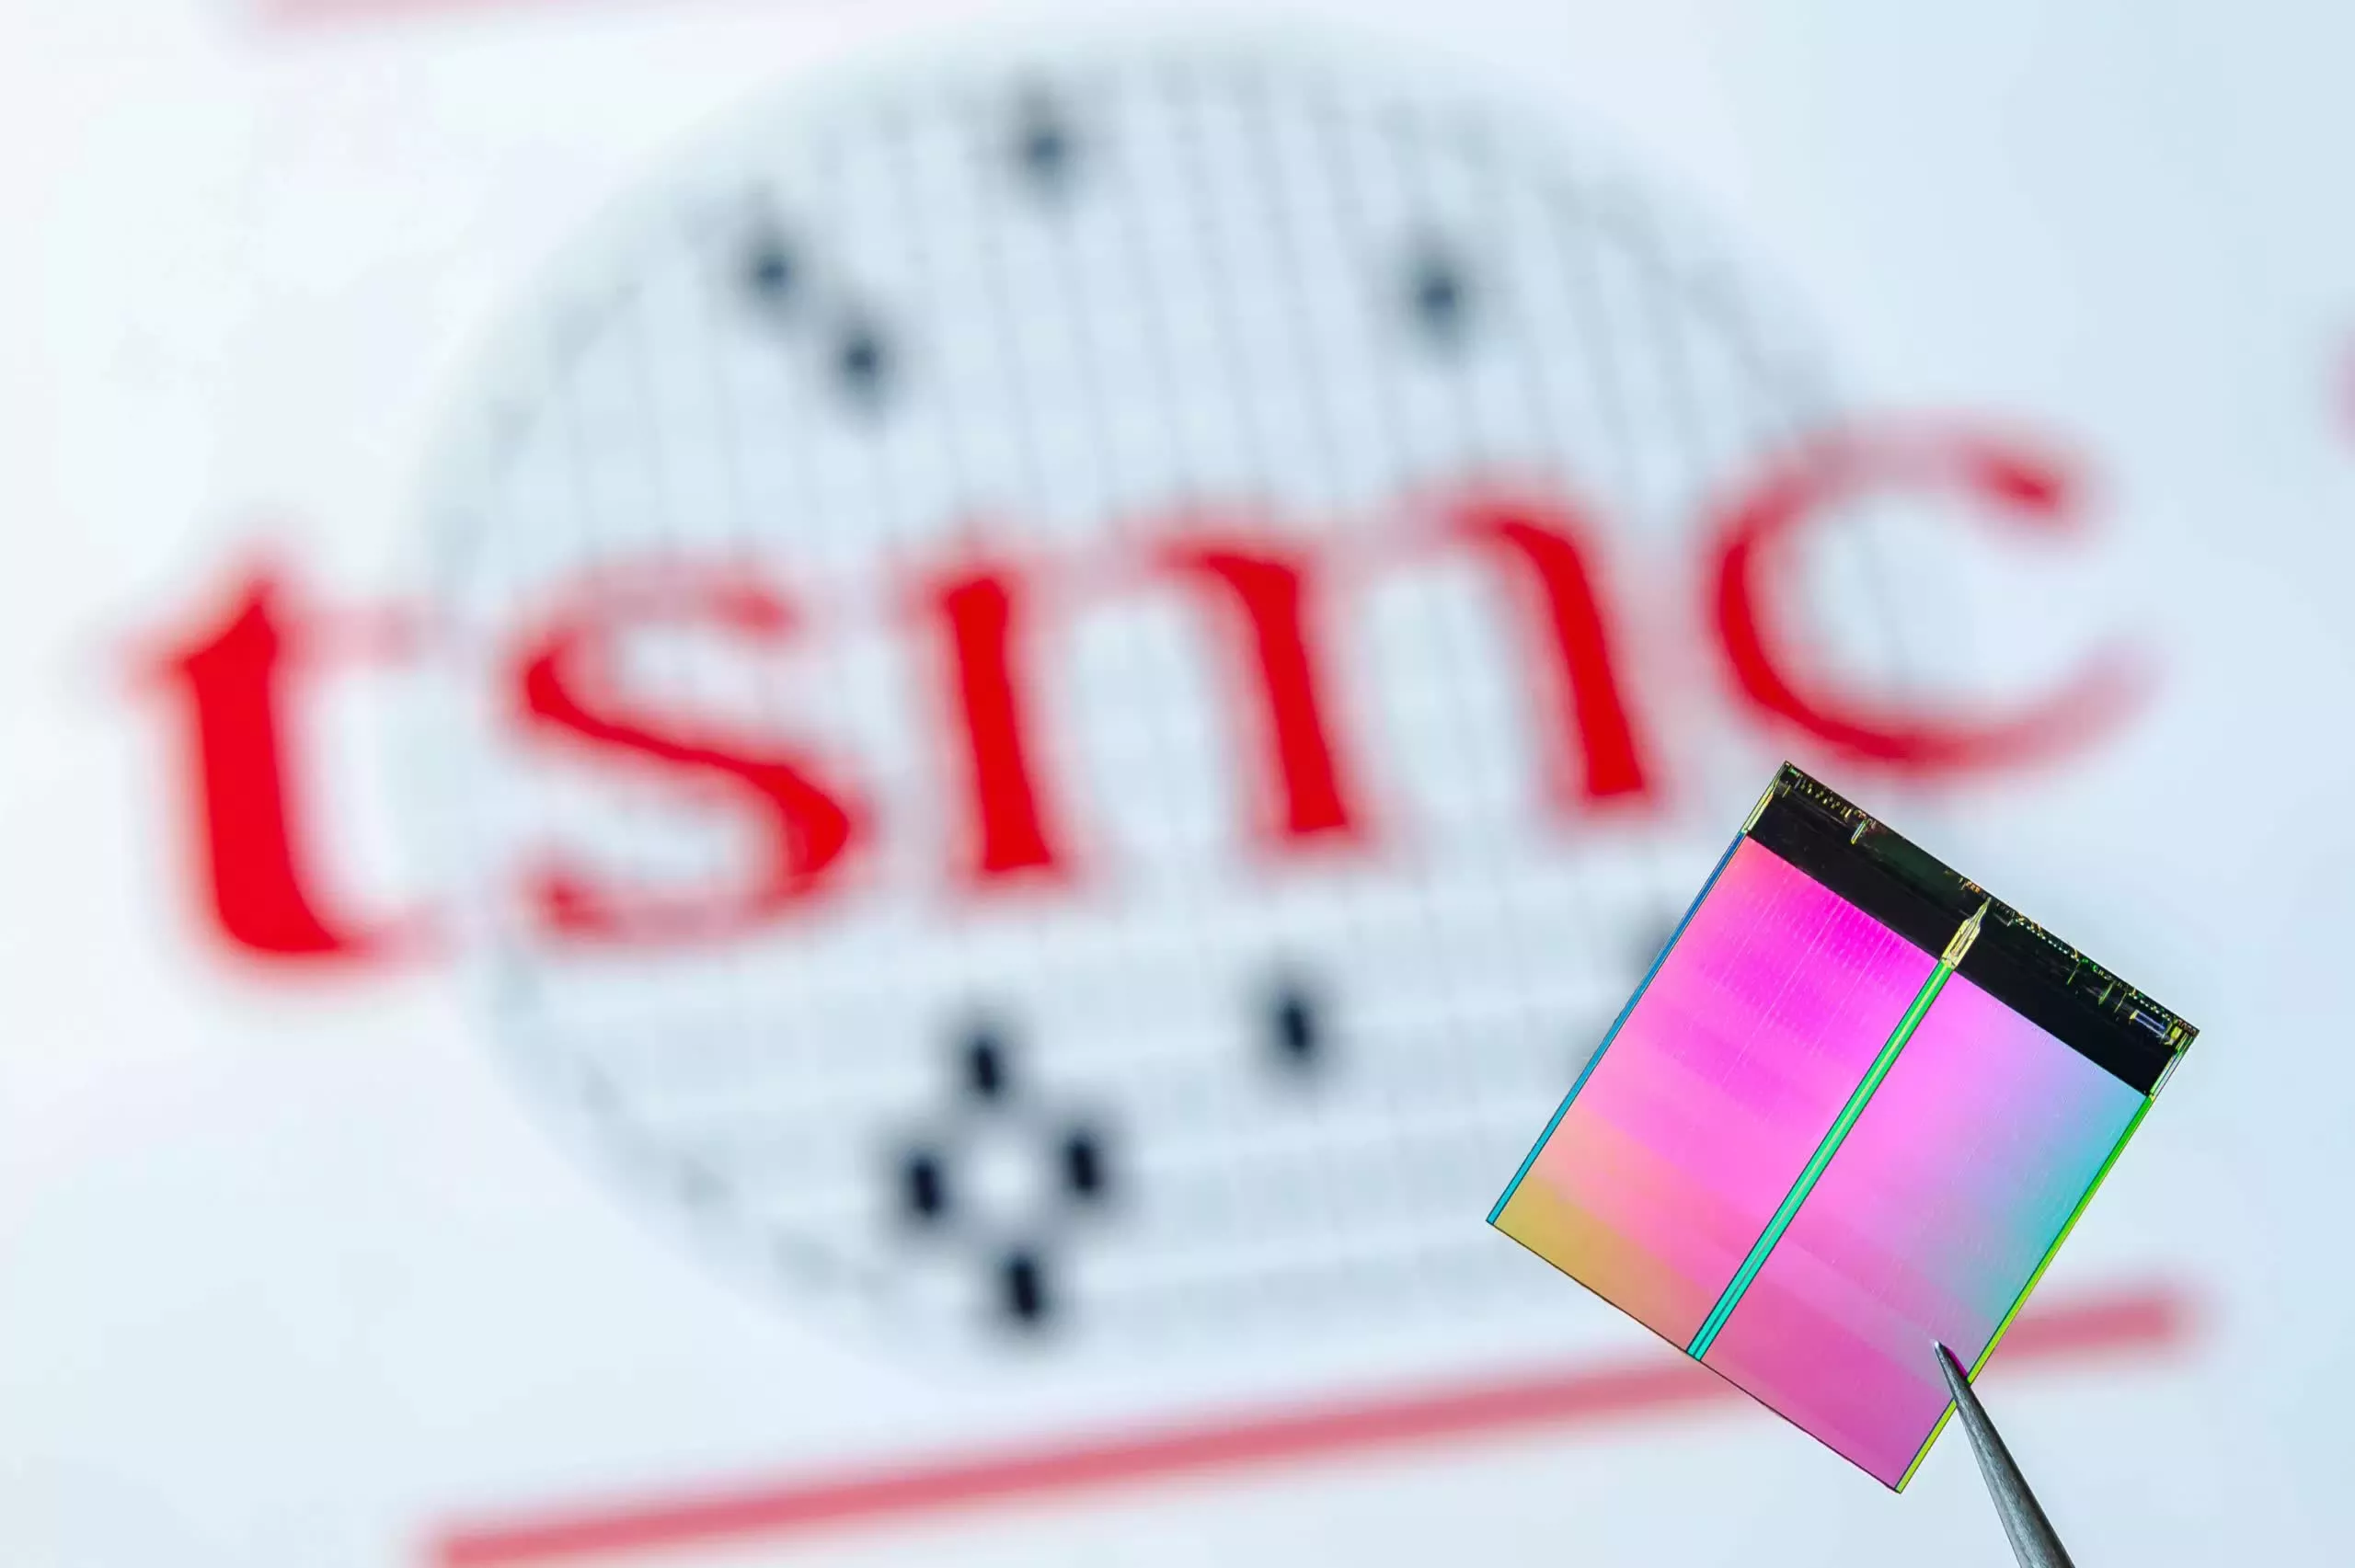 TSMC R&D executive believes the chip shortage will last until 2024